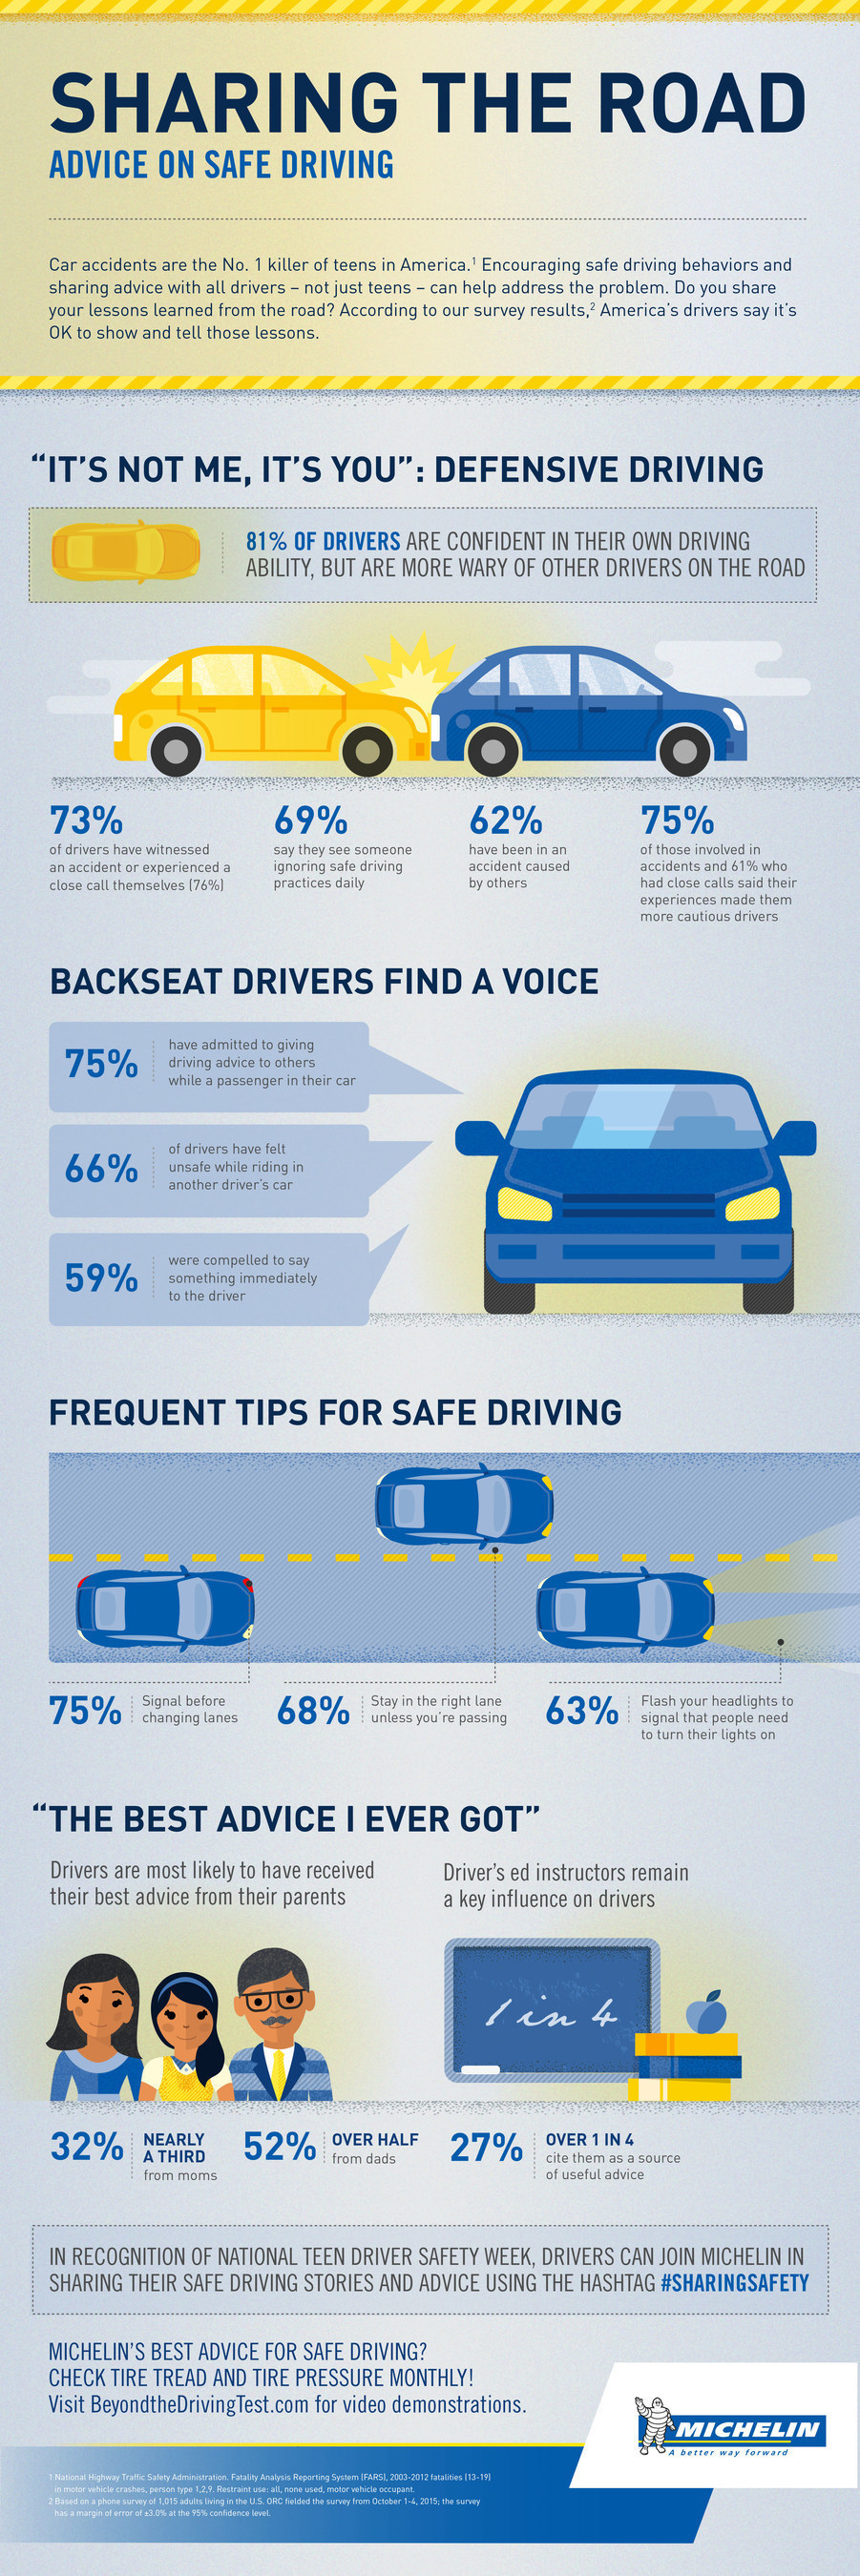 Michelin's "Sharing the Road" Survey Results Infographic